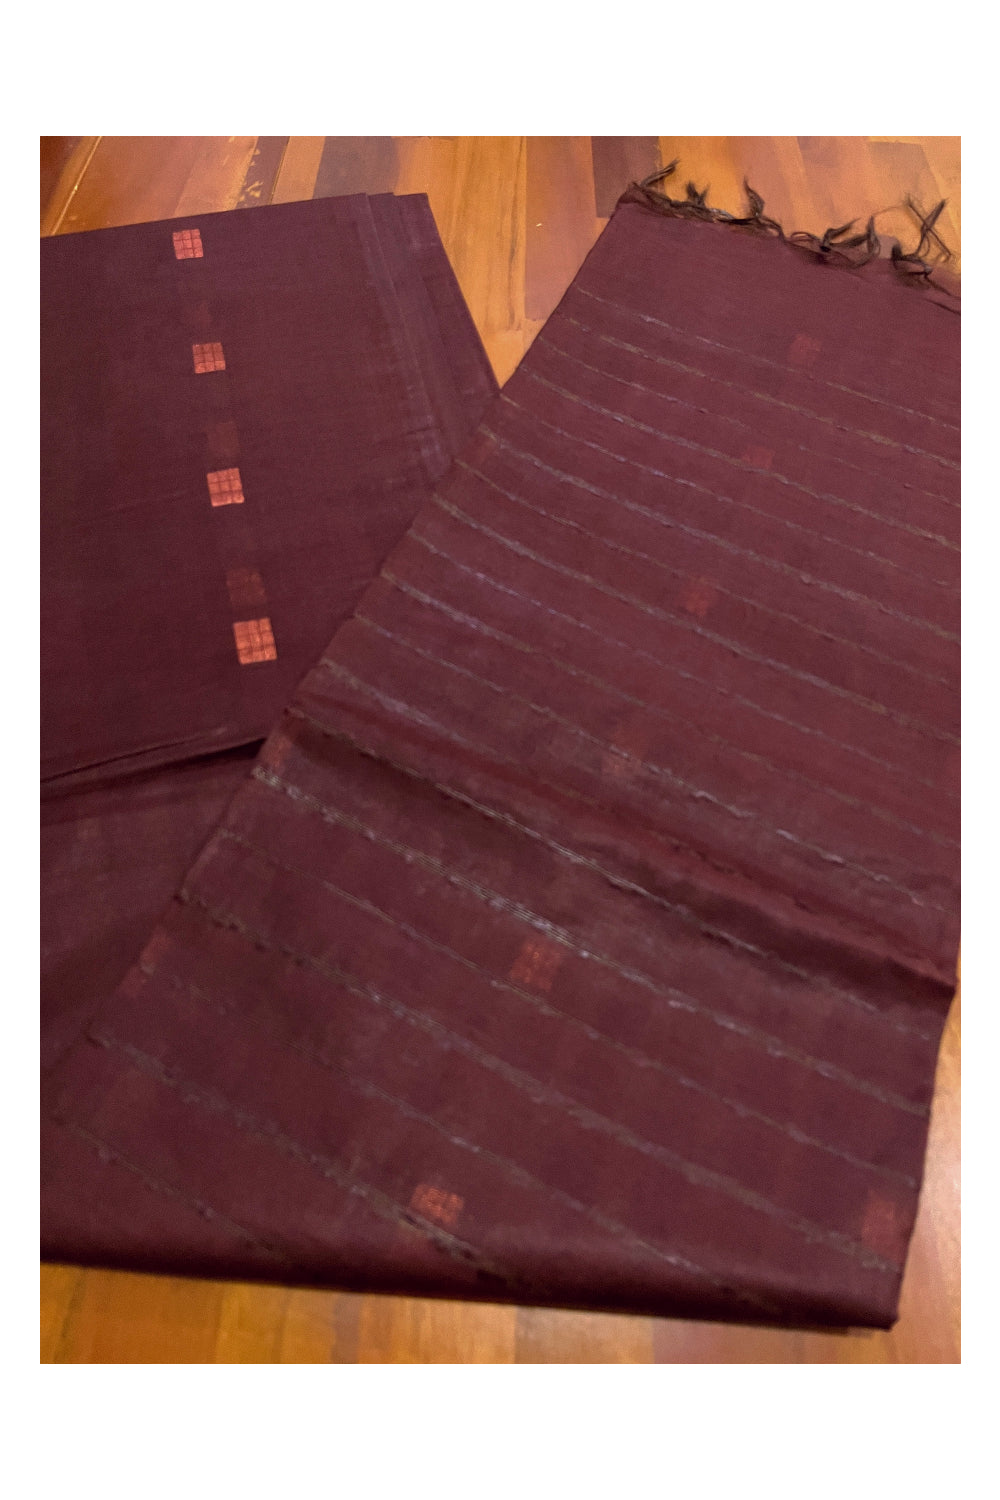 Southloom Cotton Dark Brown Saree with Copper Butta Works on Body